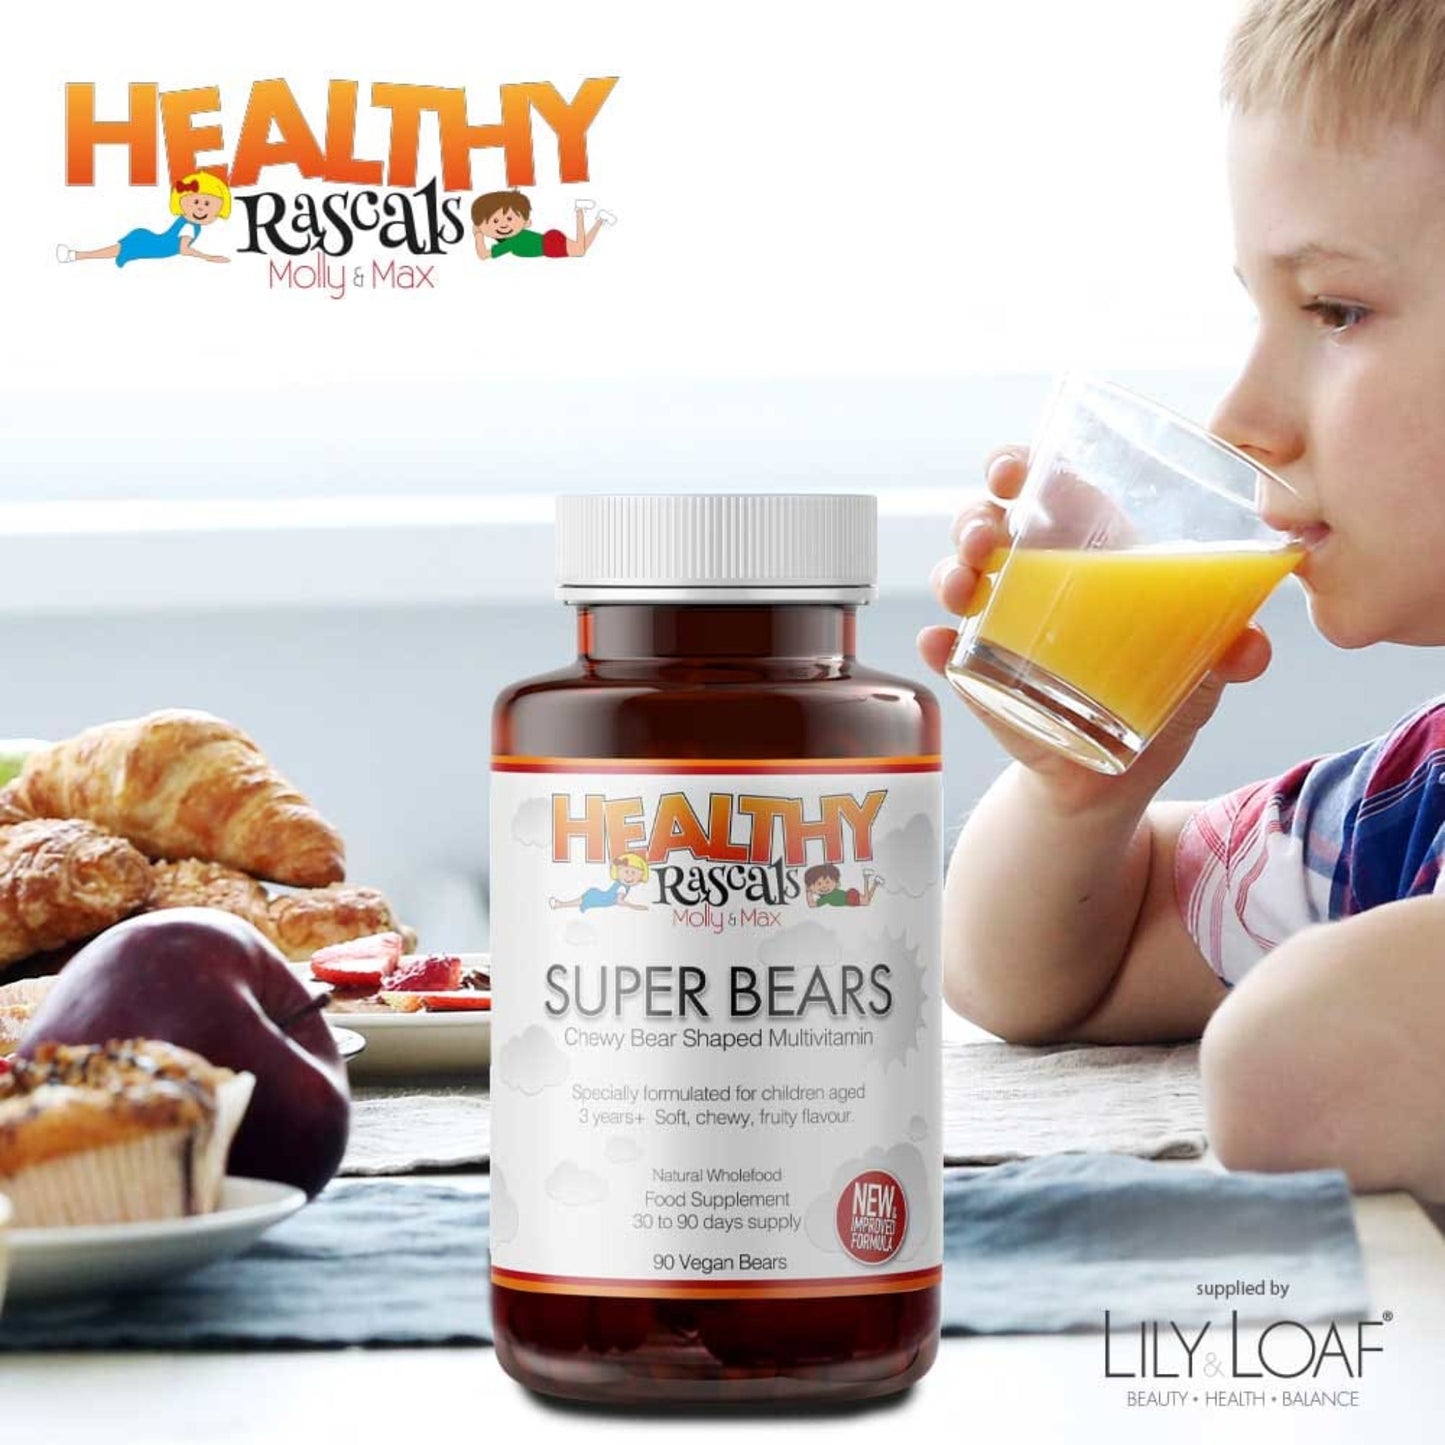 A child eating breakfast with a bottle of Healthy Rascal's Super Bears